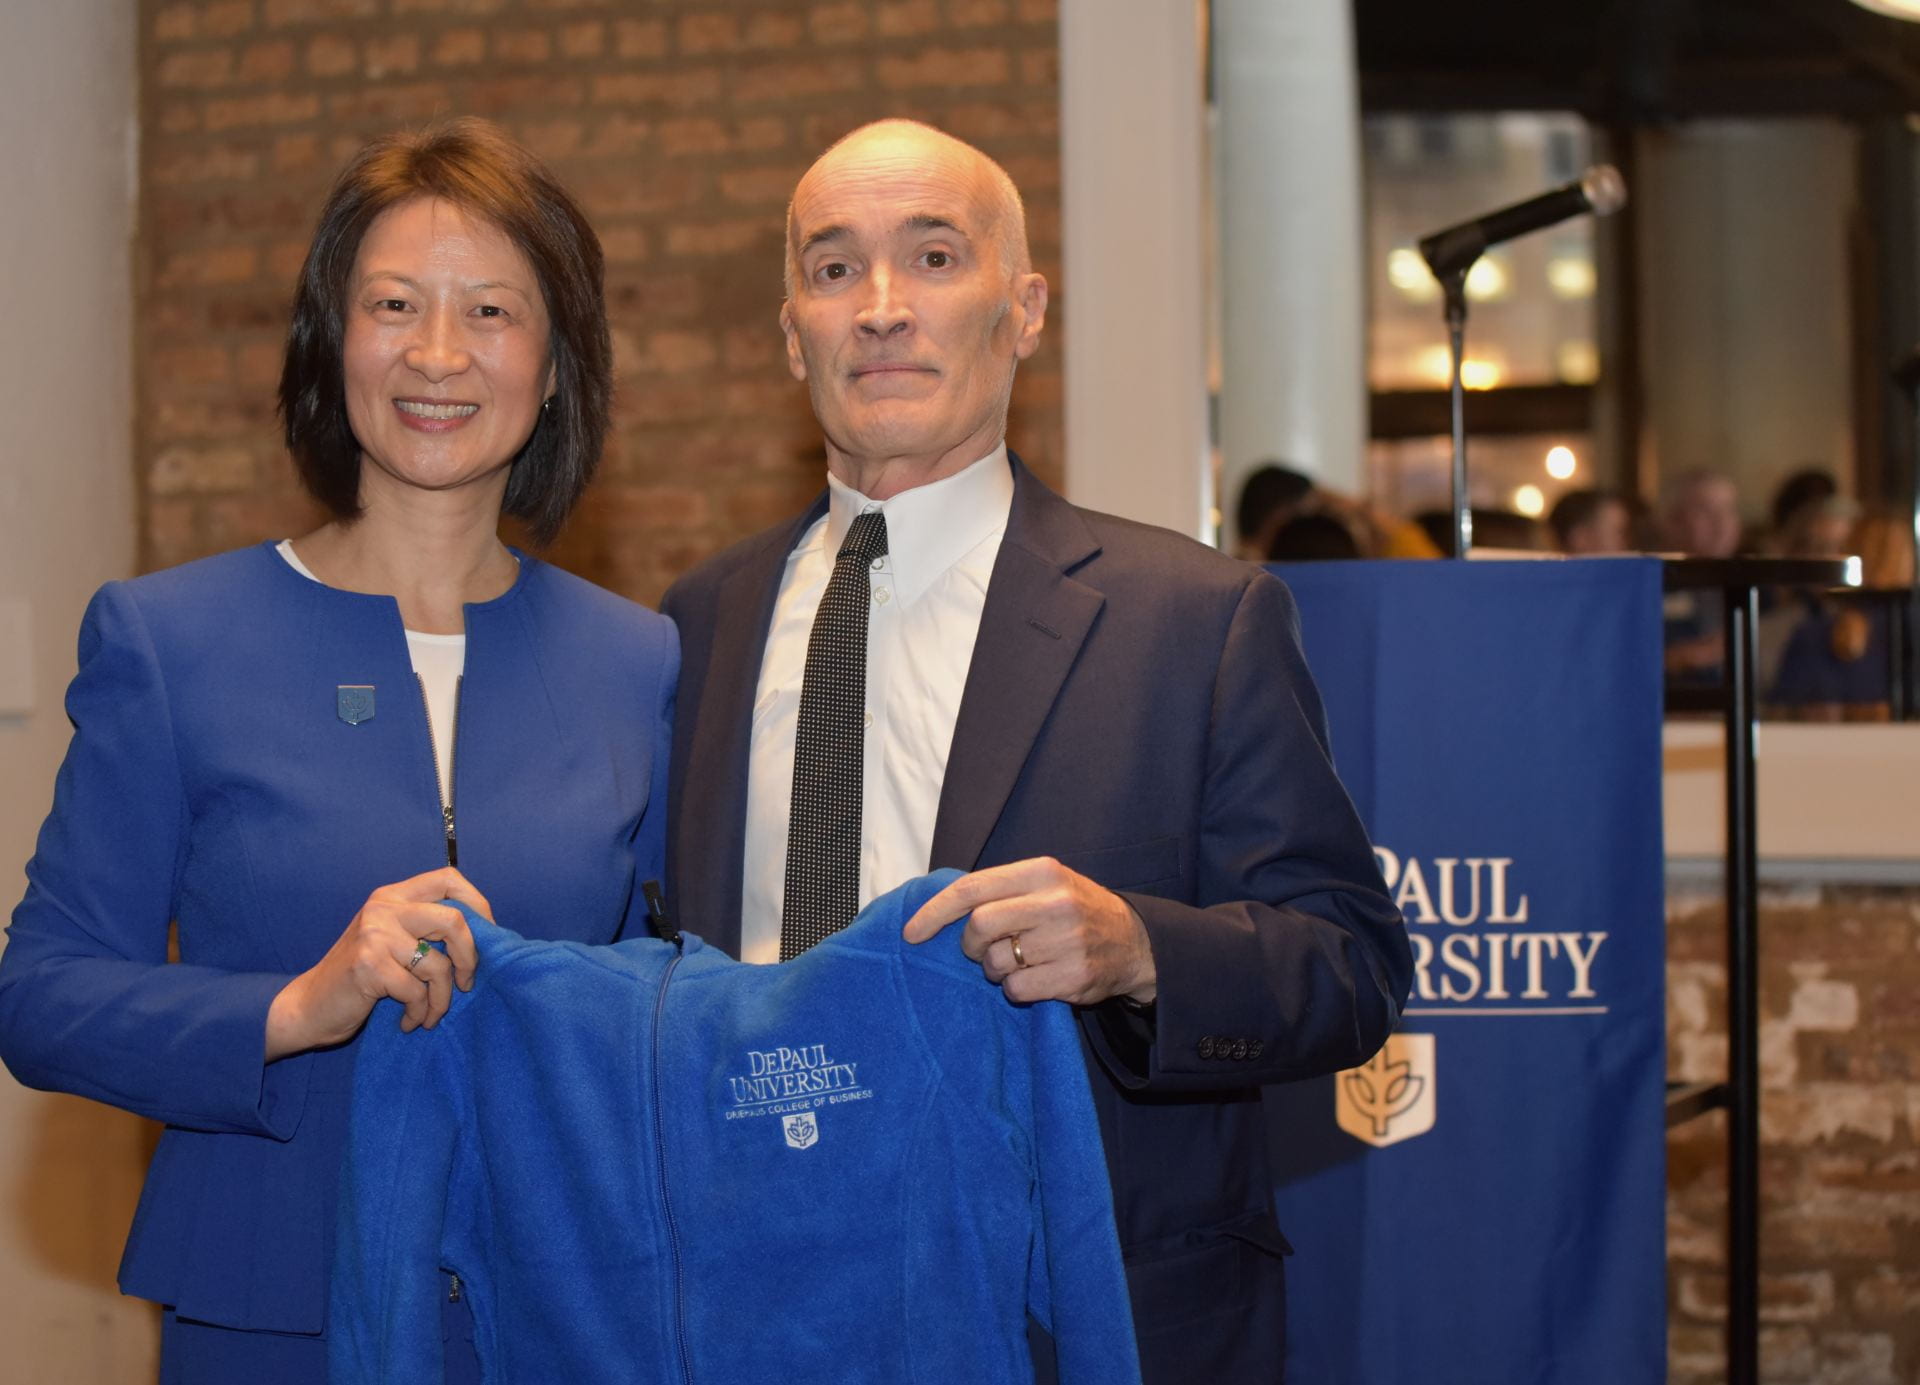 Interim Business Dean Thomas Donley welcomed Sulin Ba to DePaul by presenting her with a Driehaus College of Business jacket. (Photo By Kathy Hillegonds)